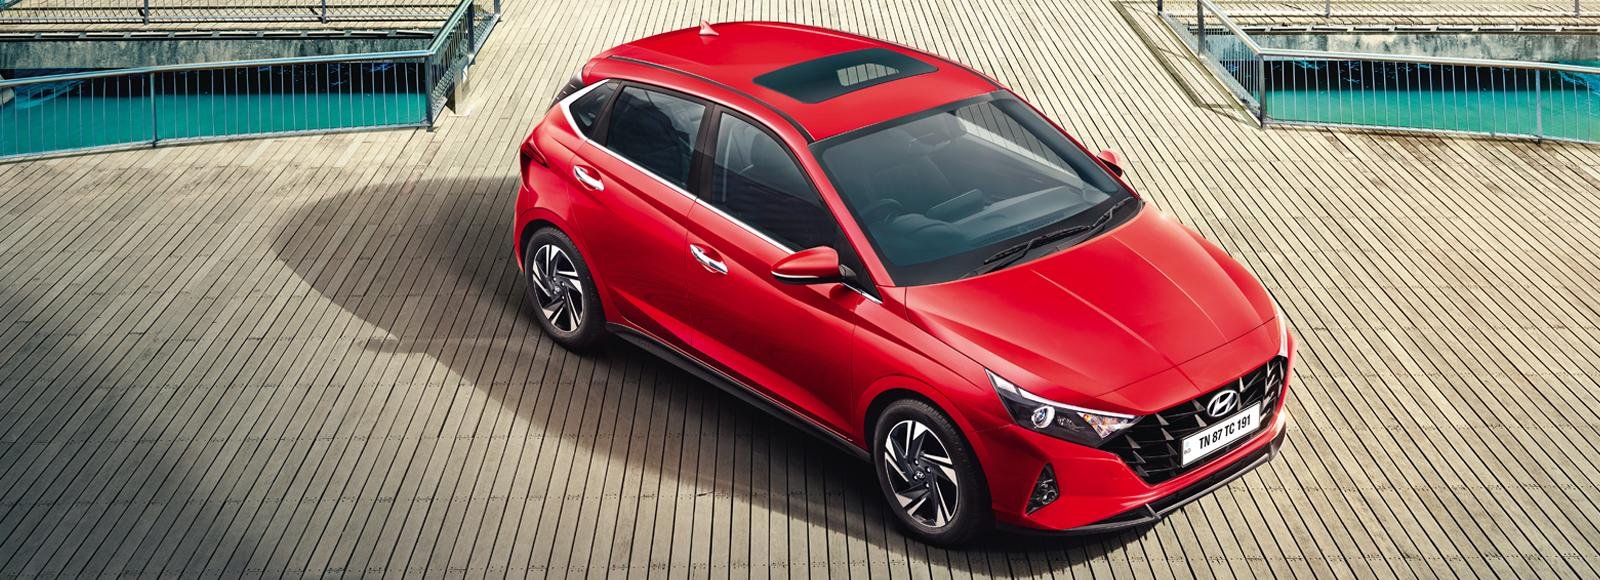 Top-5 Best Selling Premium Hatchbacks In India, March 2021